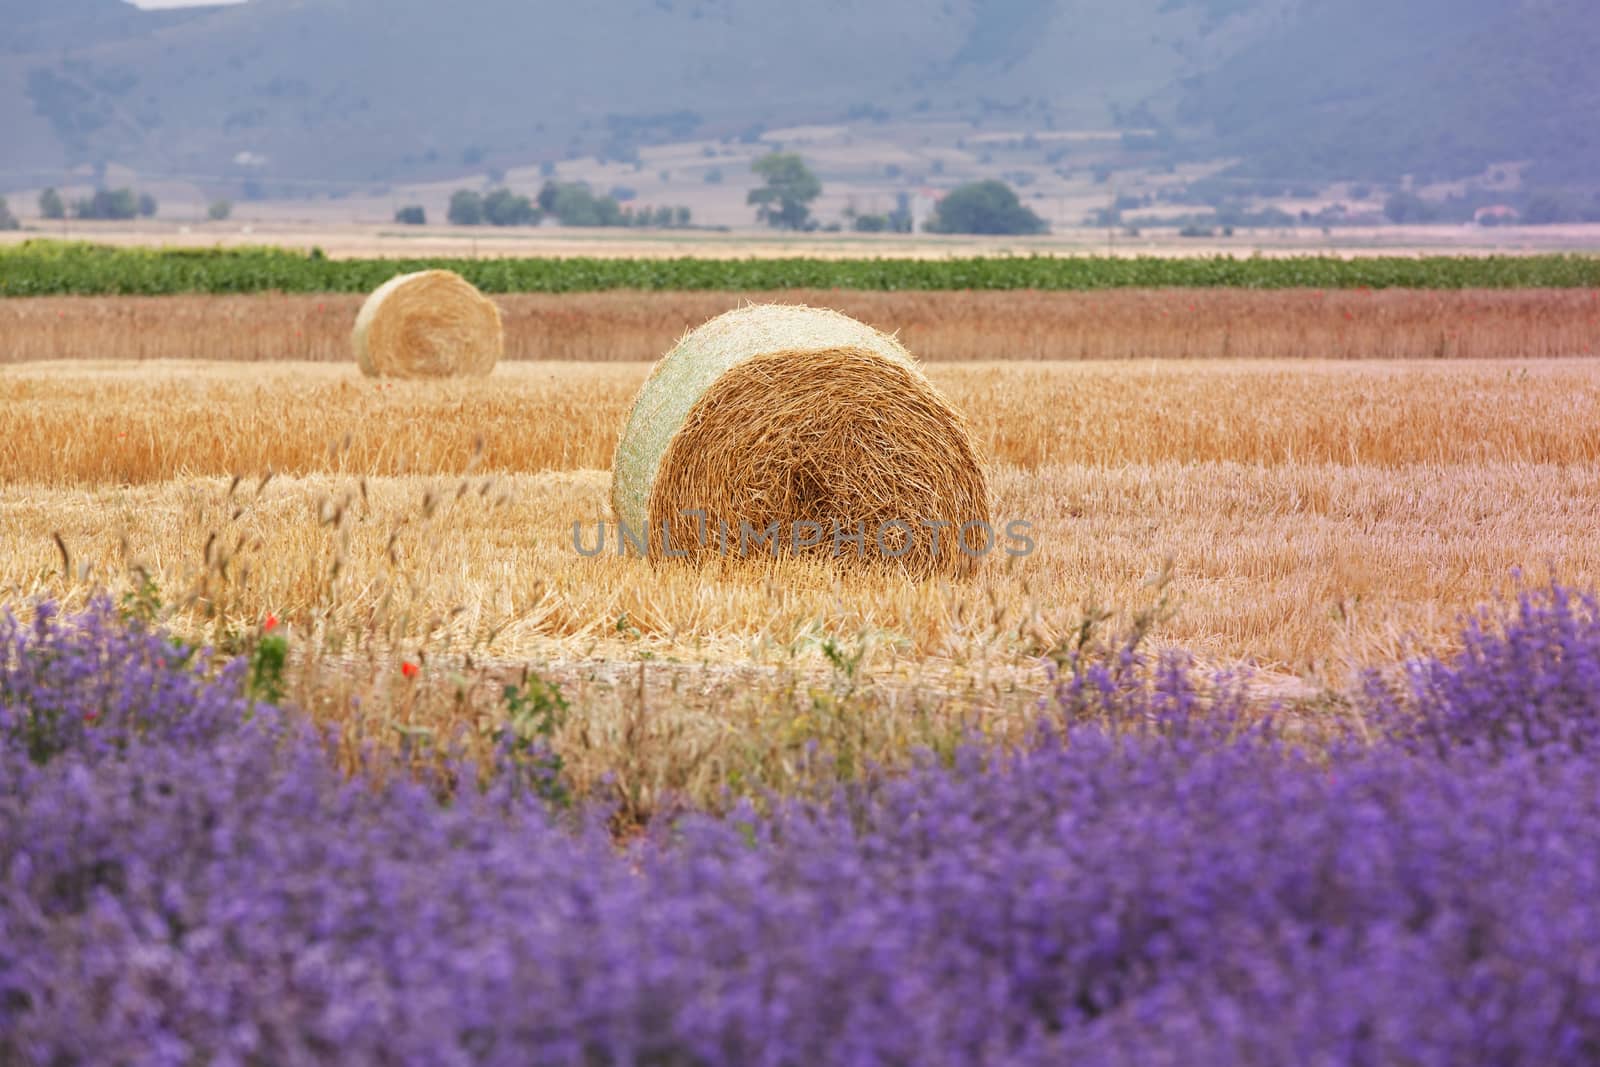 Harvested field and blooming lavender in summer. Focus on hay bale